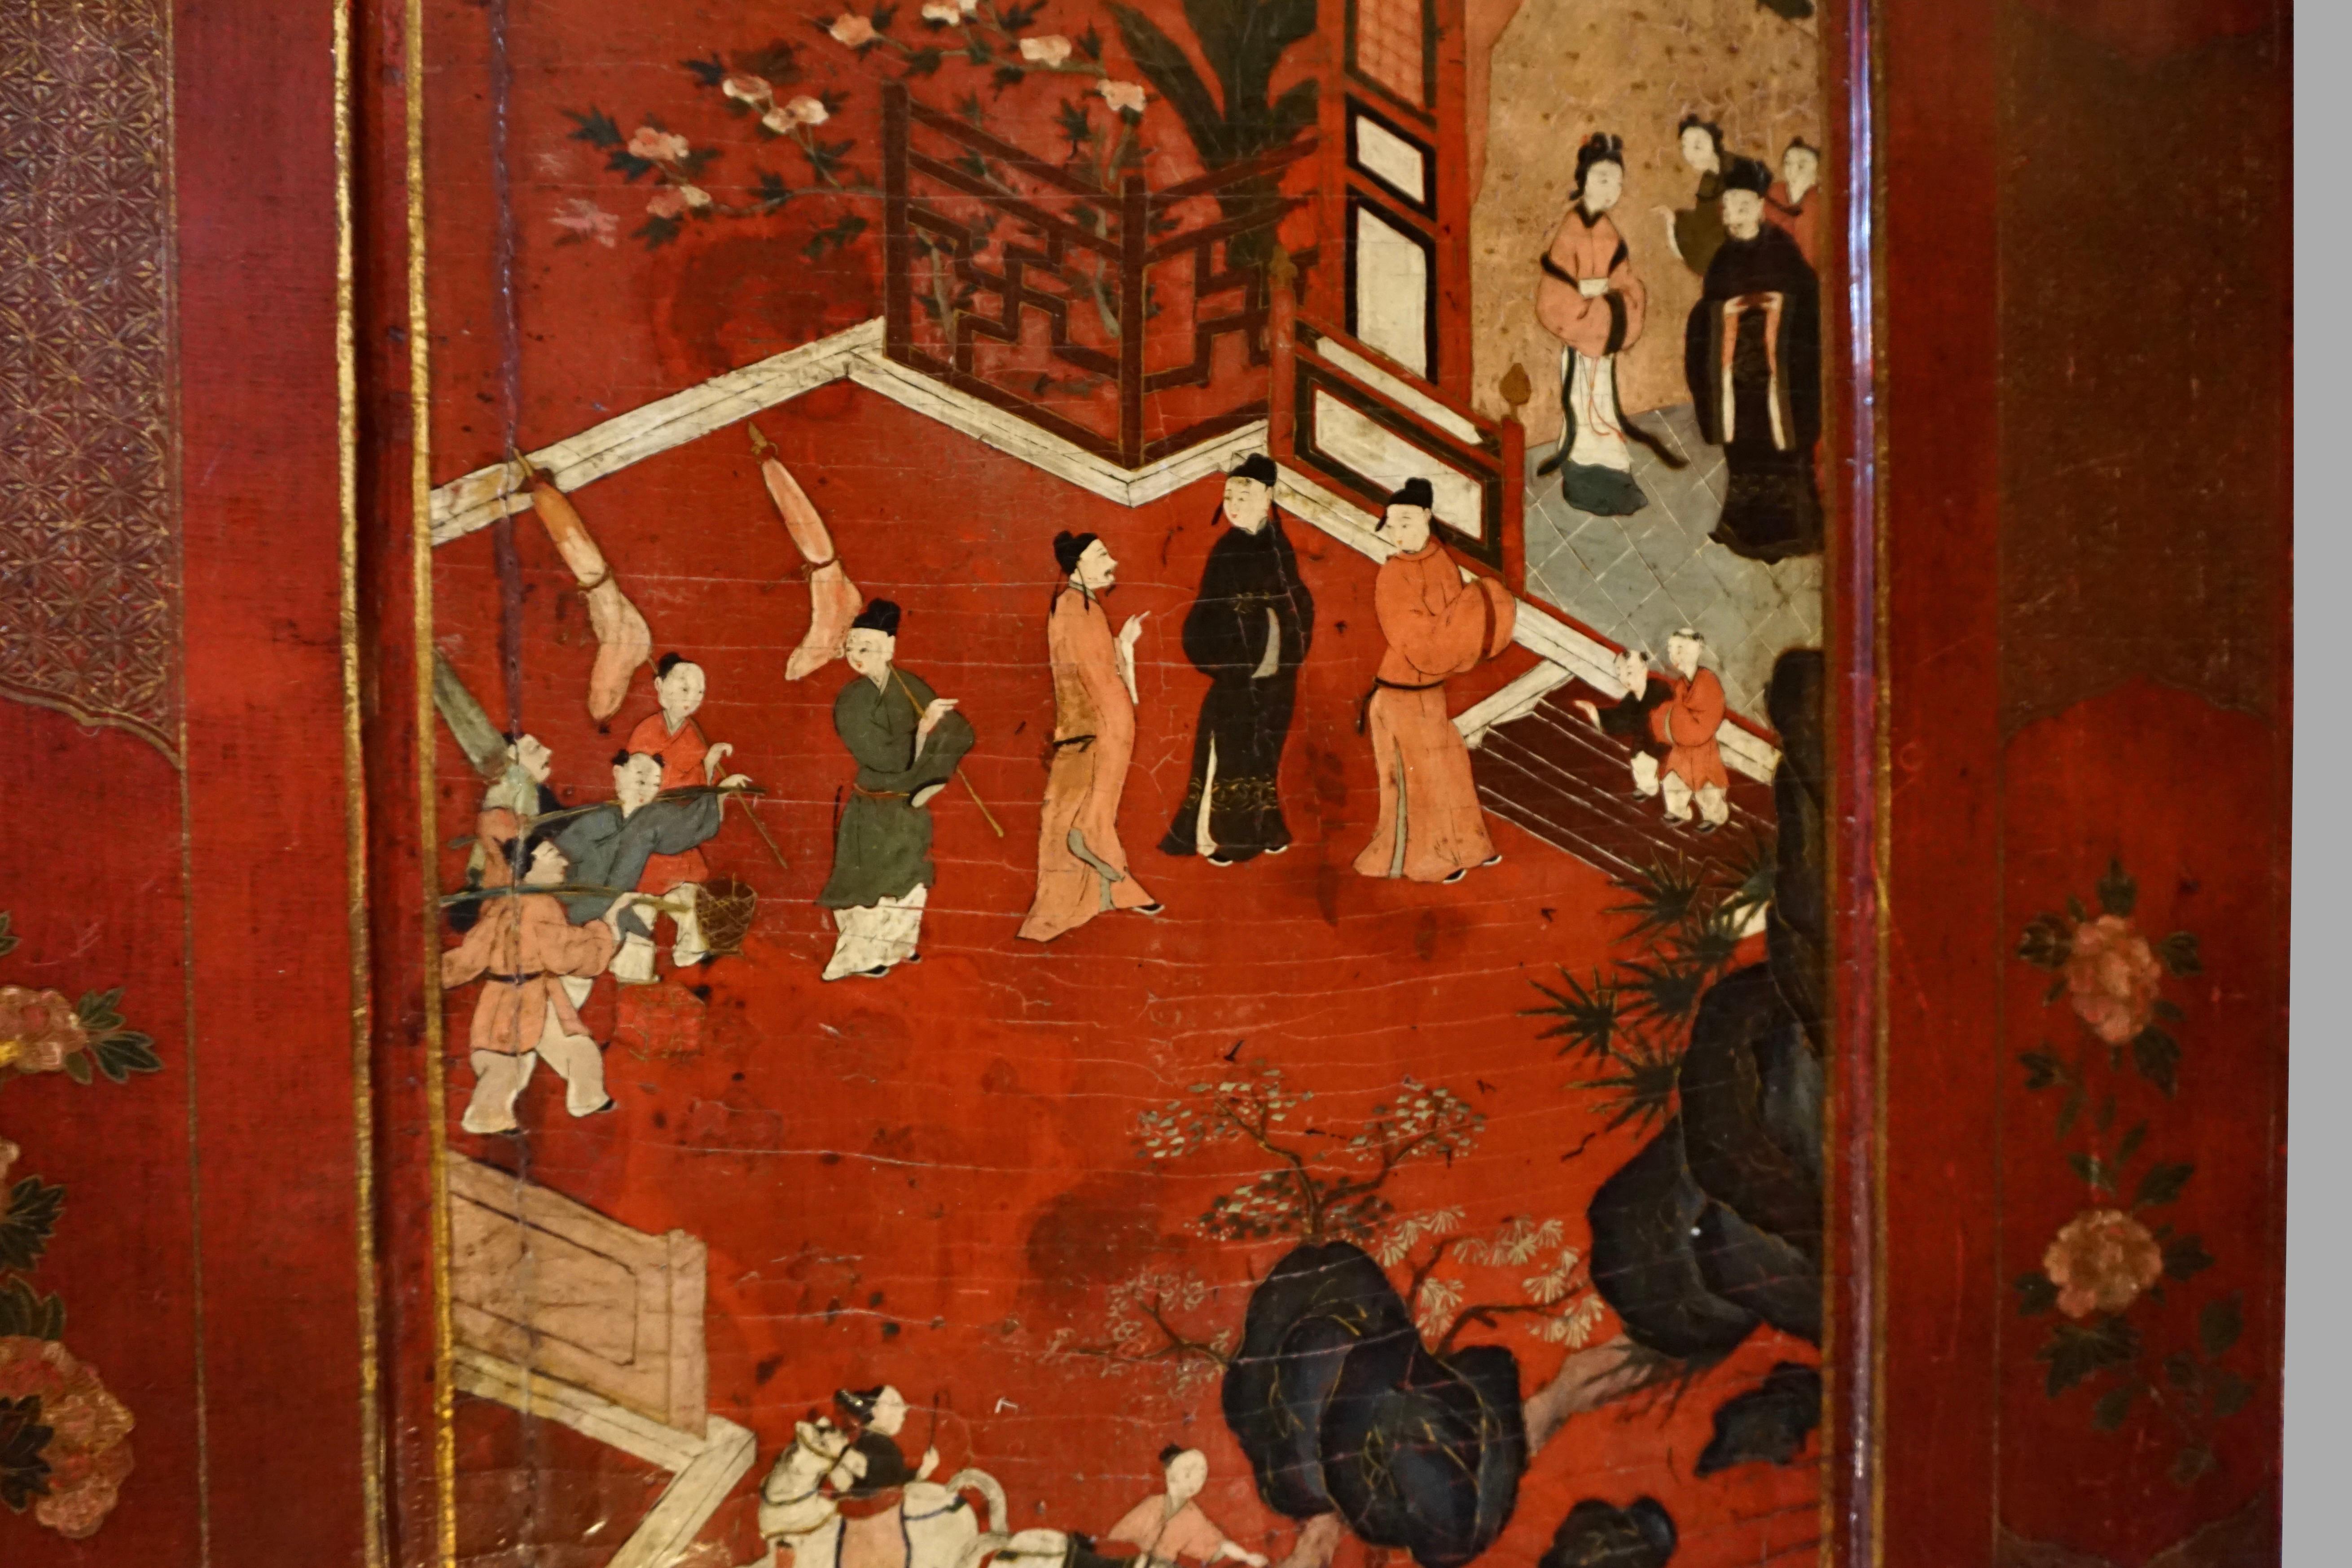 A beautiful Chinese red lacquer panel depicting court figures in a garden setting, the foreground with 2 women and horses, the center with a group of people waiting to enter a structure. The panel has been later mounted in a floral decorated custom